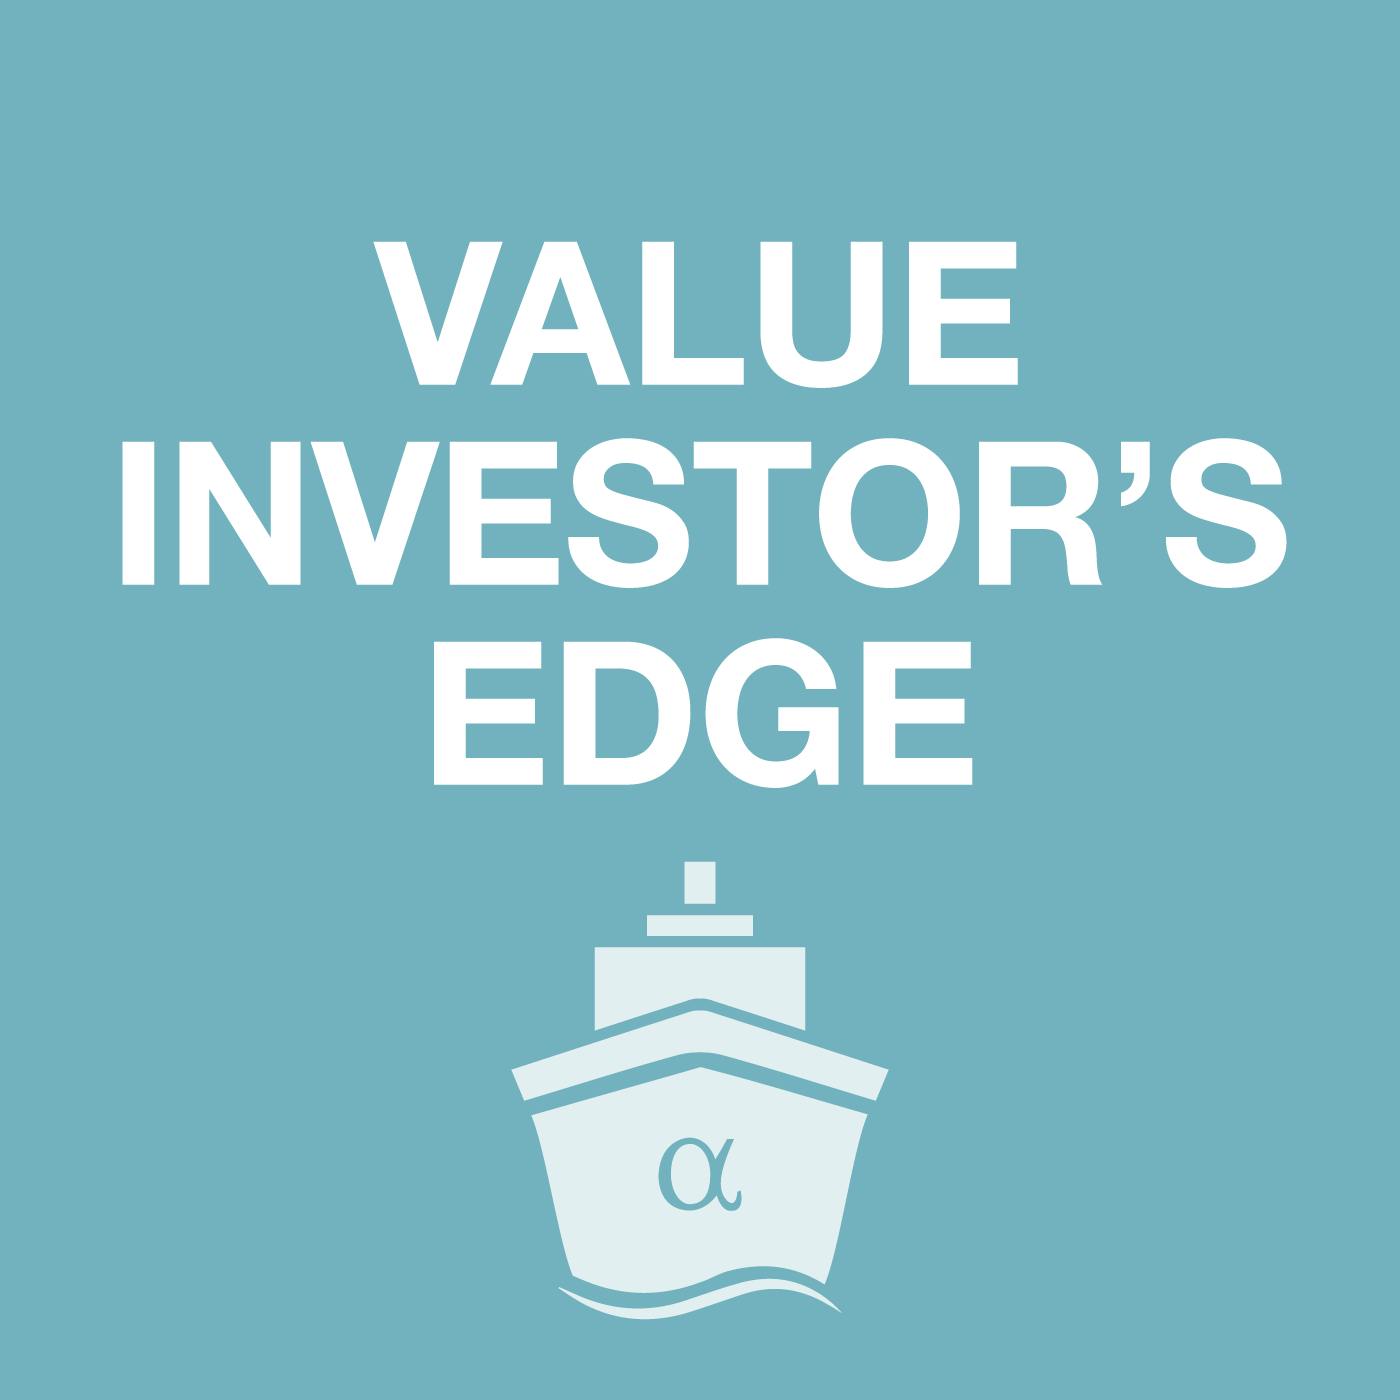 Value Investor's Edge Live #17: Virtual Investor Forum on COVID-19 and Oil Price War, With Euronav's CEO